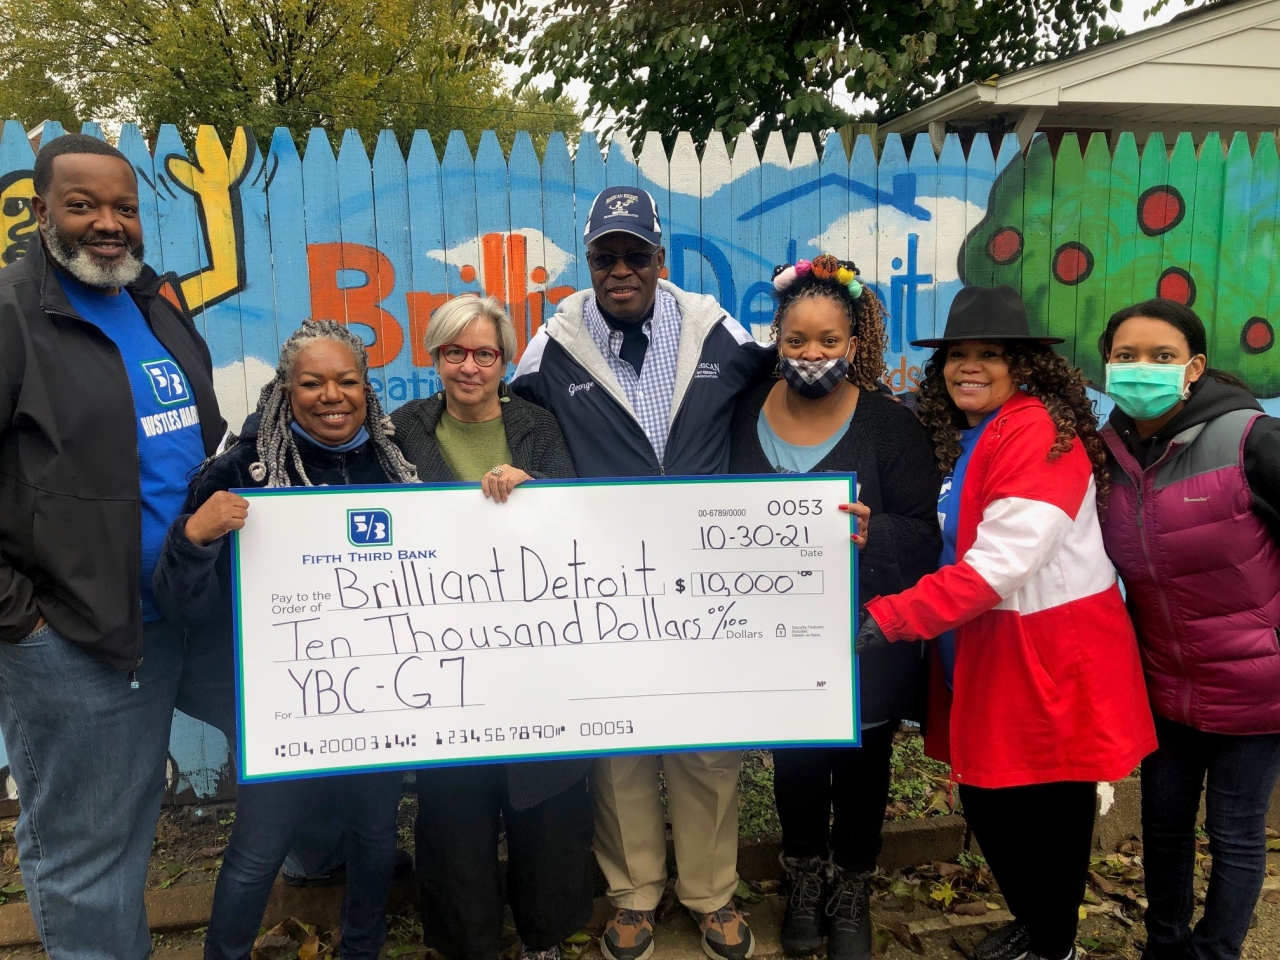 Members of Brilliant Detroit holding $10,000 check from Fifth Third Bank